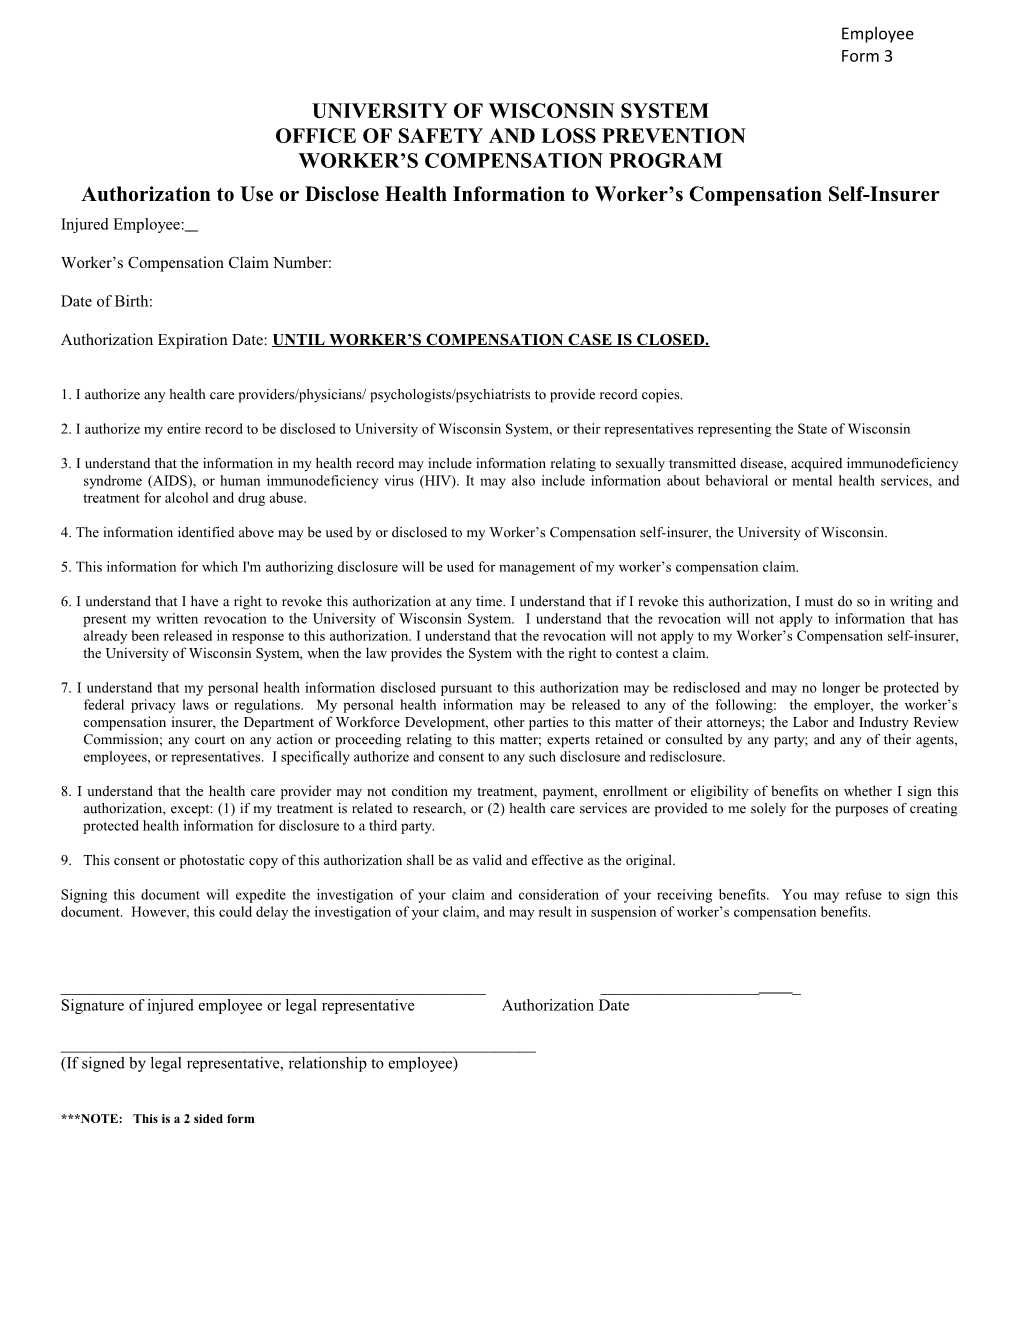 Authorization to Use Or Disclose Health Information